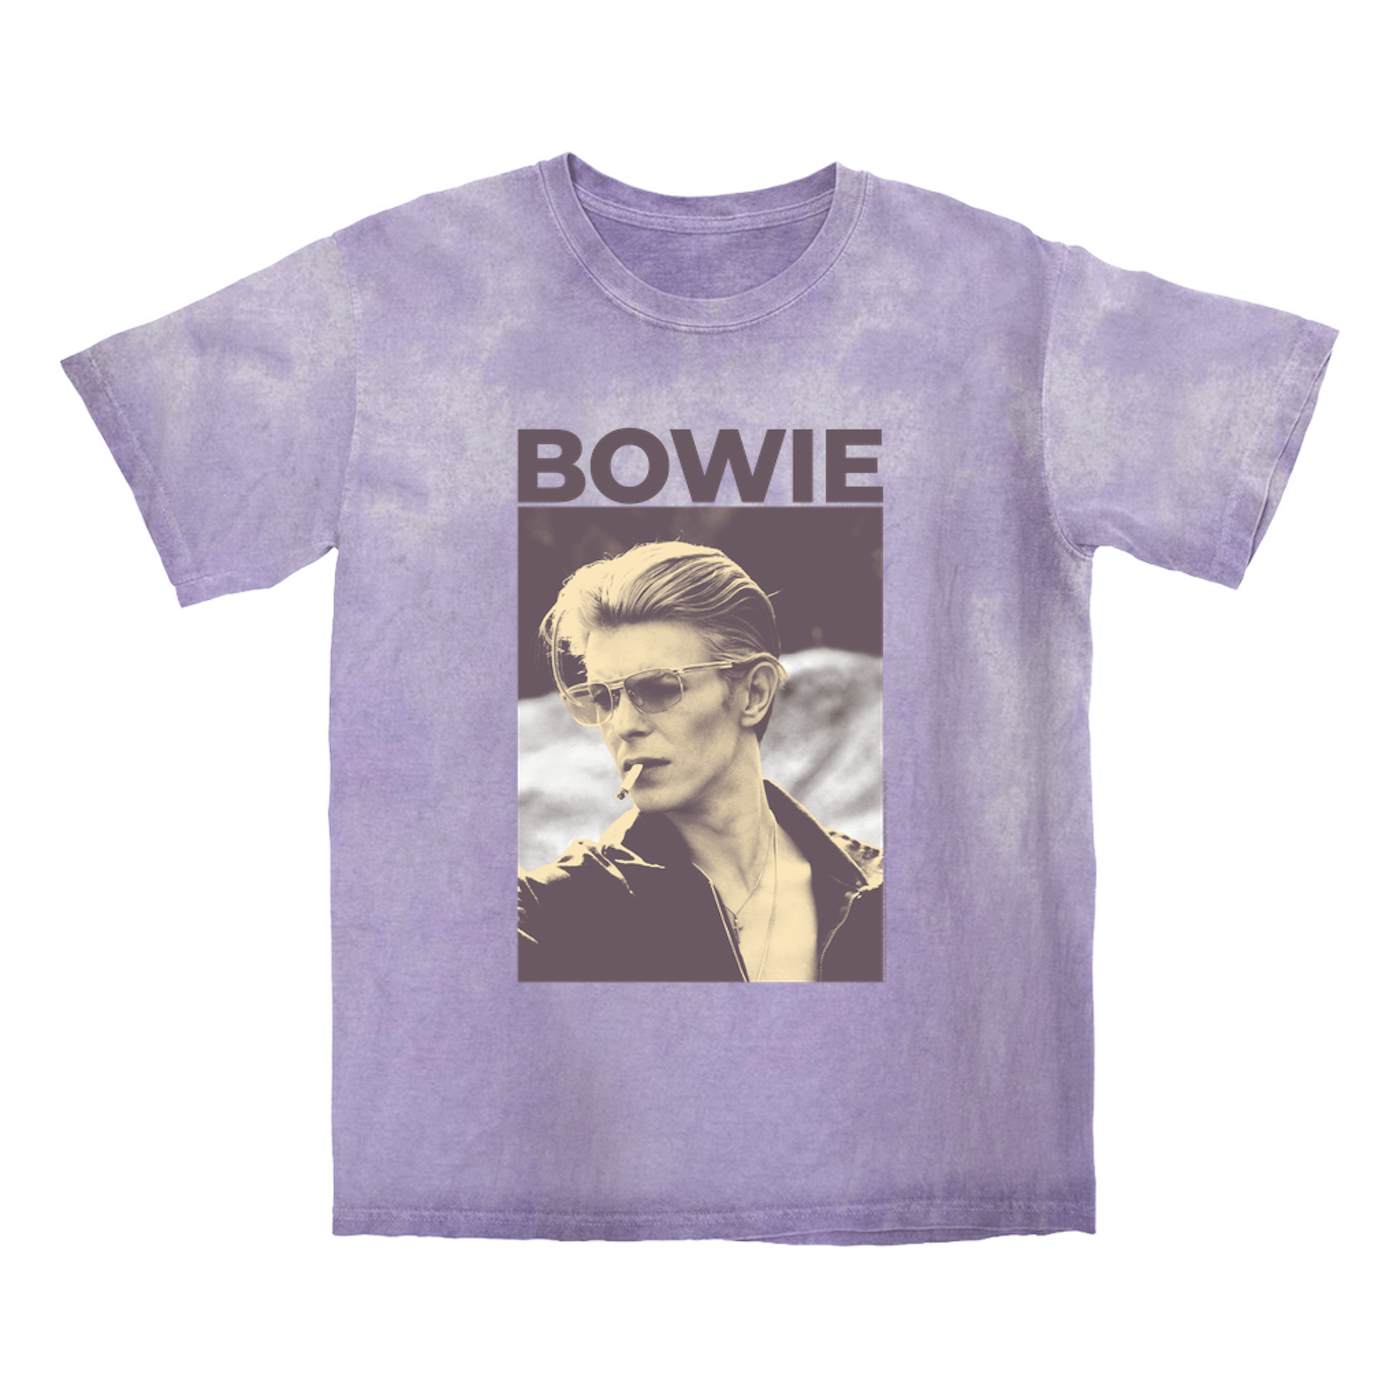 David Bowie T-shirt | The Man Who Fell To Earth Sepia Photo David Bowie Color Blast Shirt